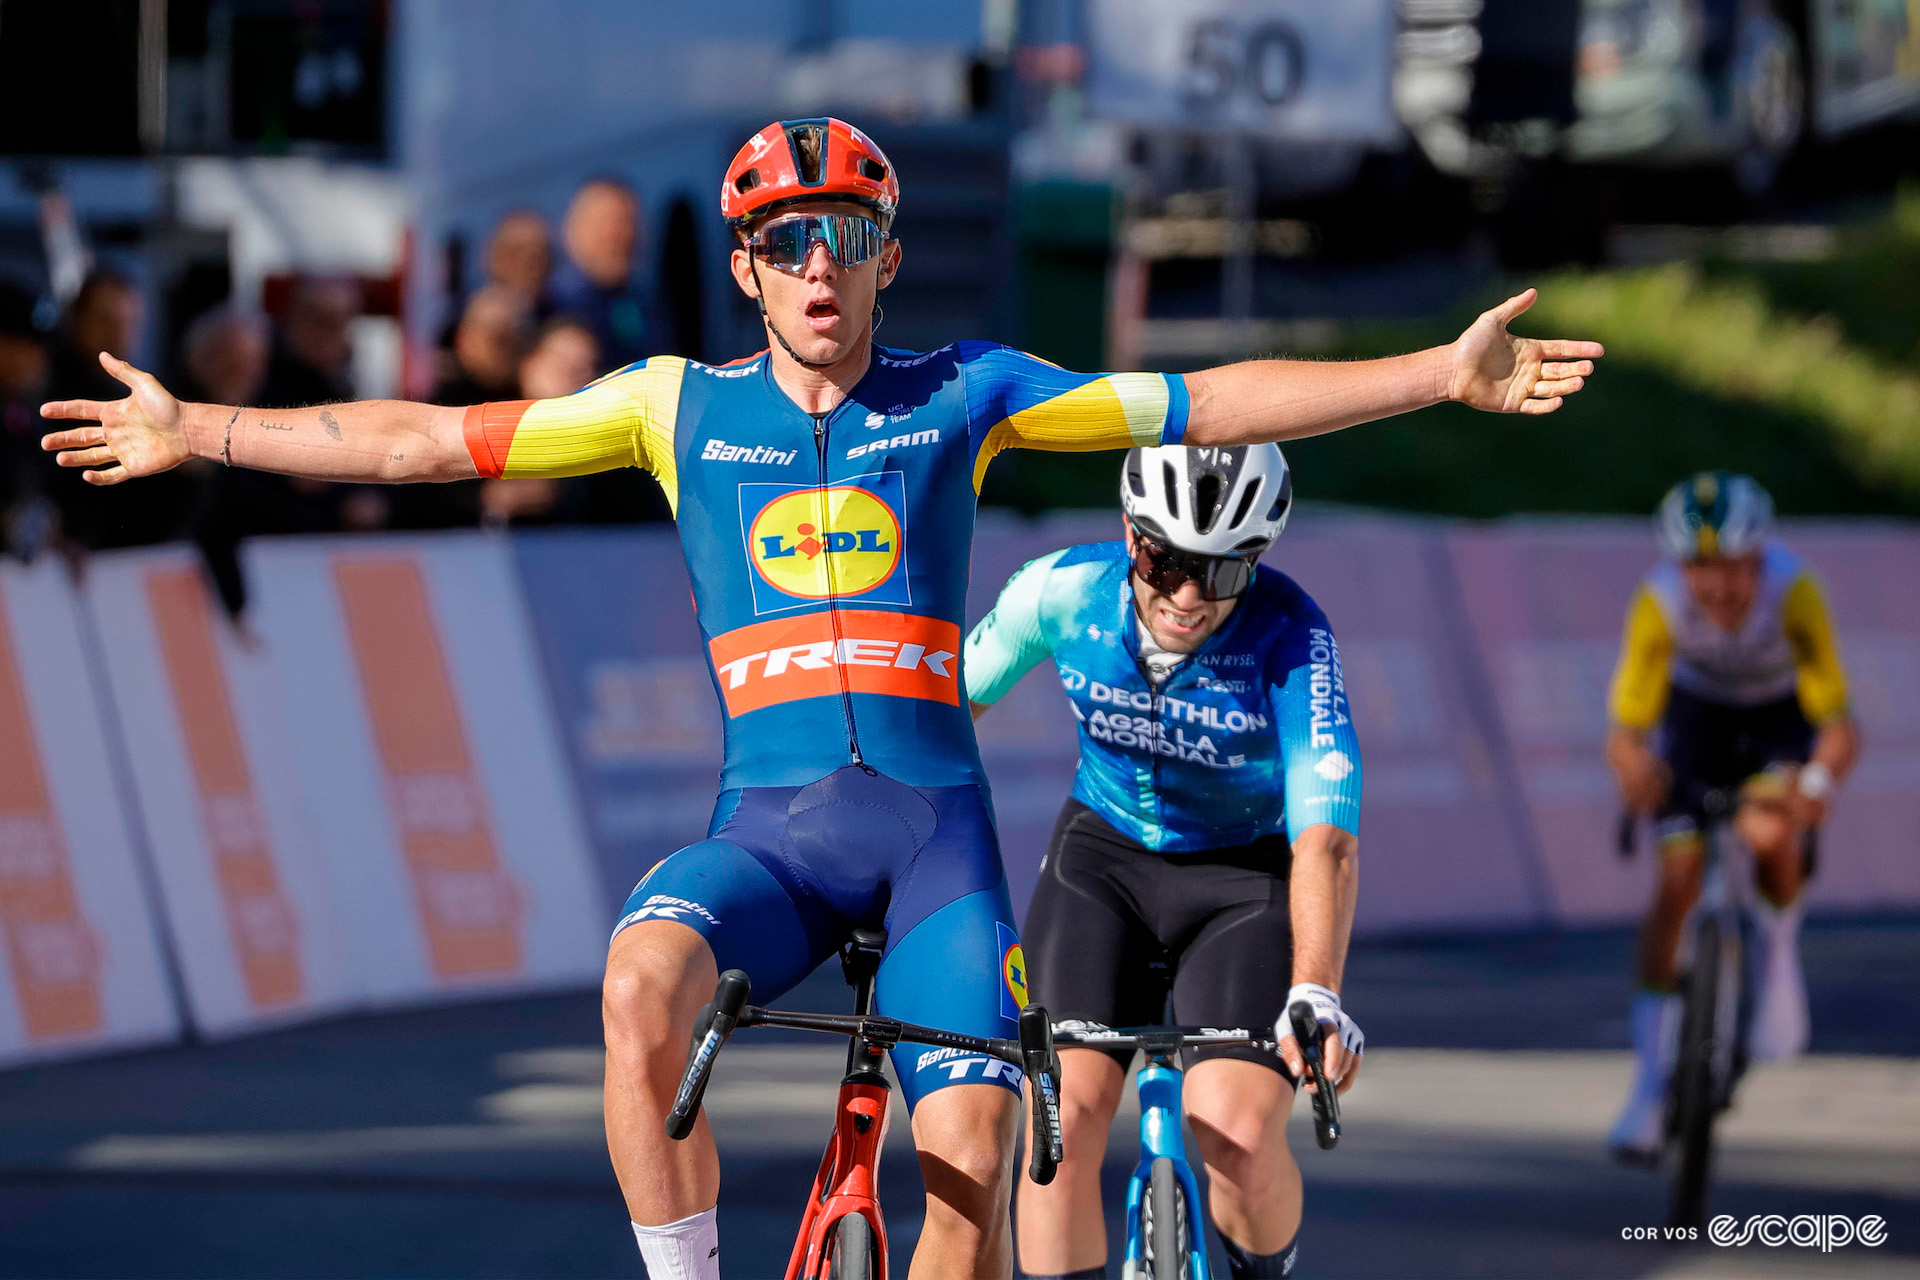 Thibau Nys wins stage 3 of the Tour de Romandie from the breakaway.